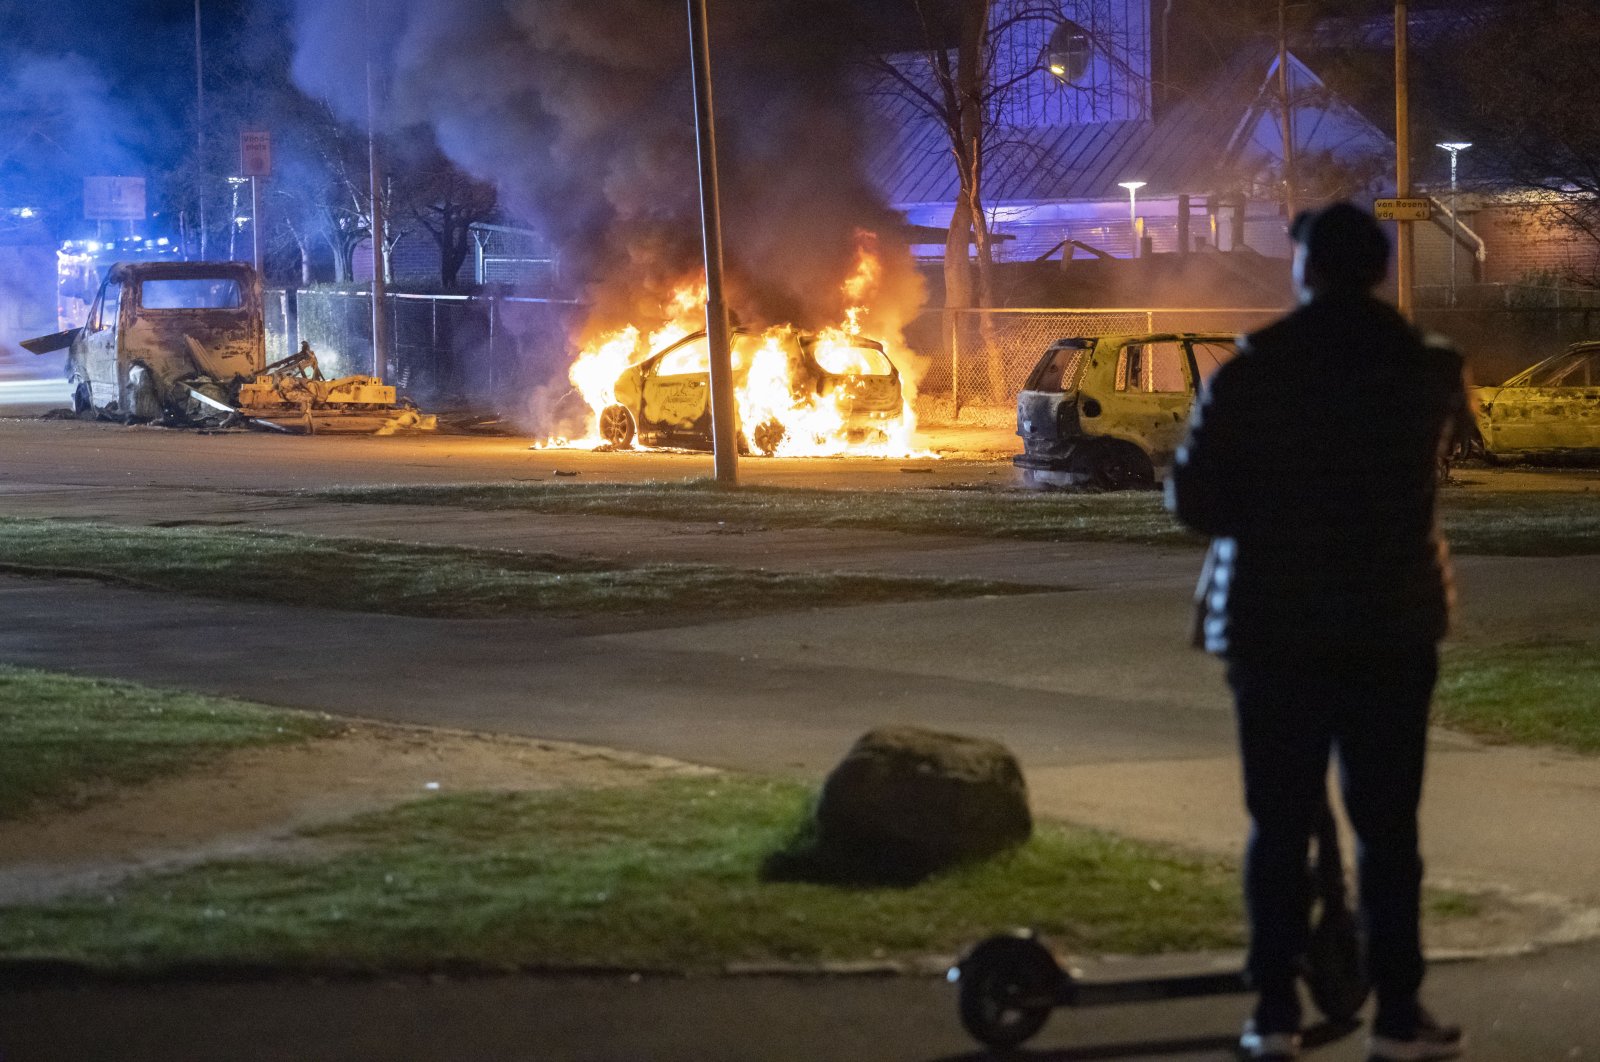 A man looks at burning cars after protests broke out at Rosengard in Malmo, Sweden, early Monday, April 17, 2022. The protests broke out following Danish far-right politician Rasmus Paludan’s burning of the Quran and other planned Quran burnings in various Swedish cities and towns since Thursday. (AP Photo)